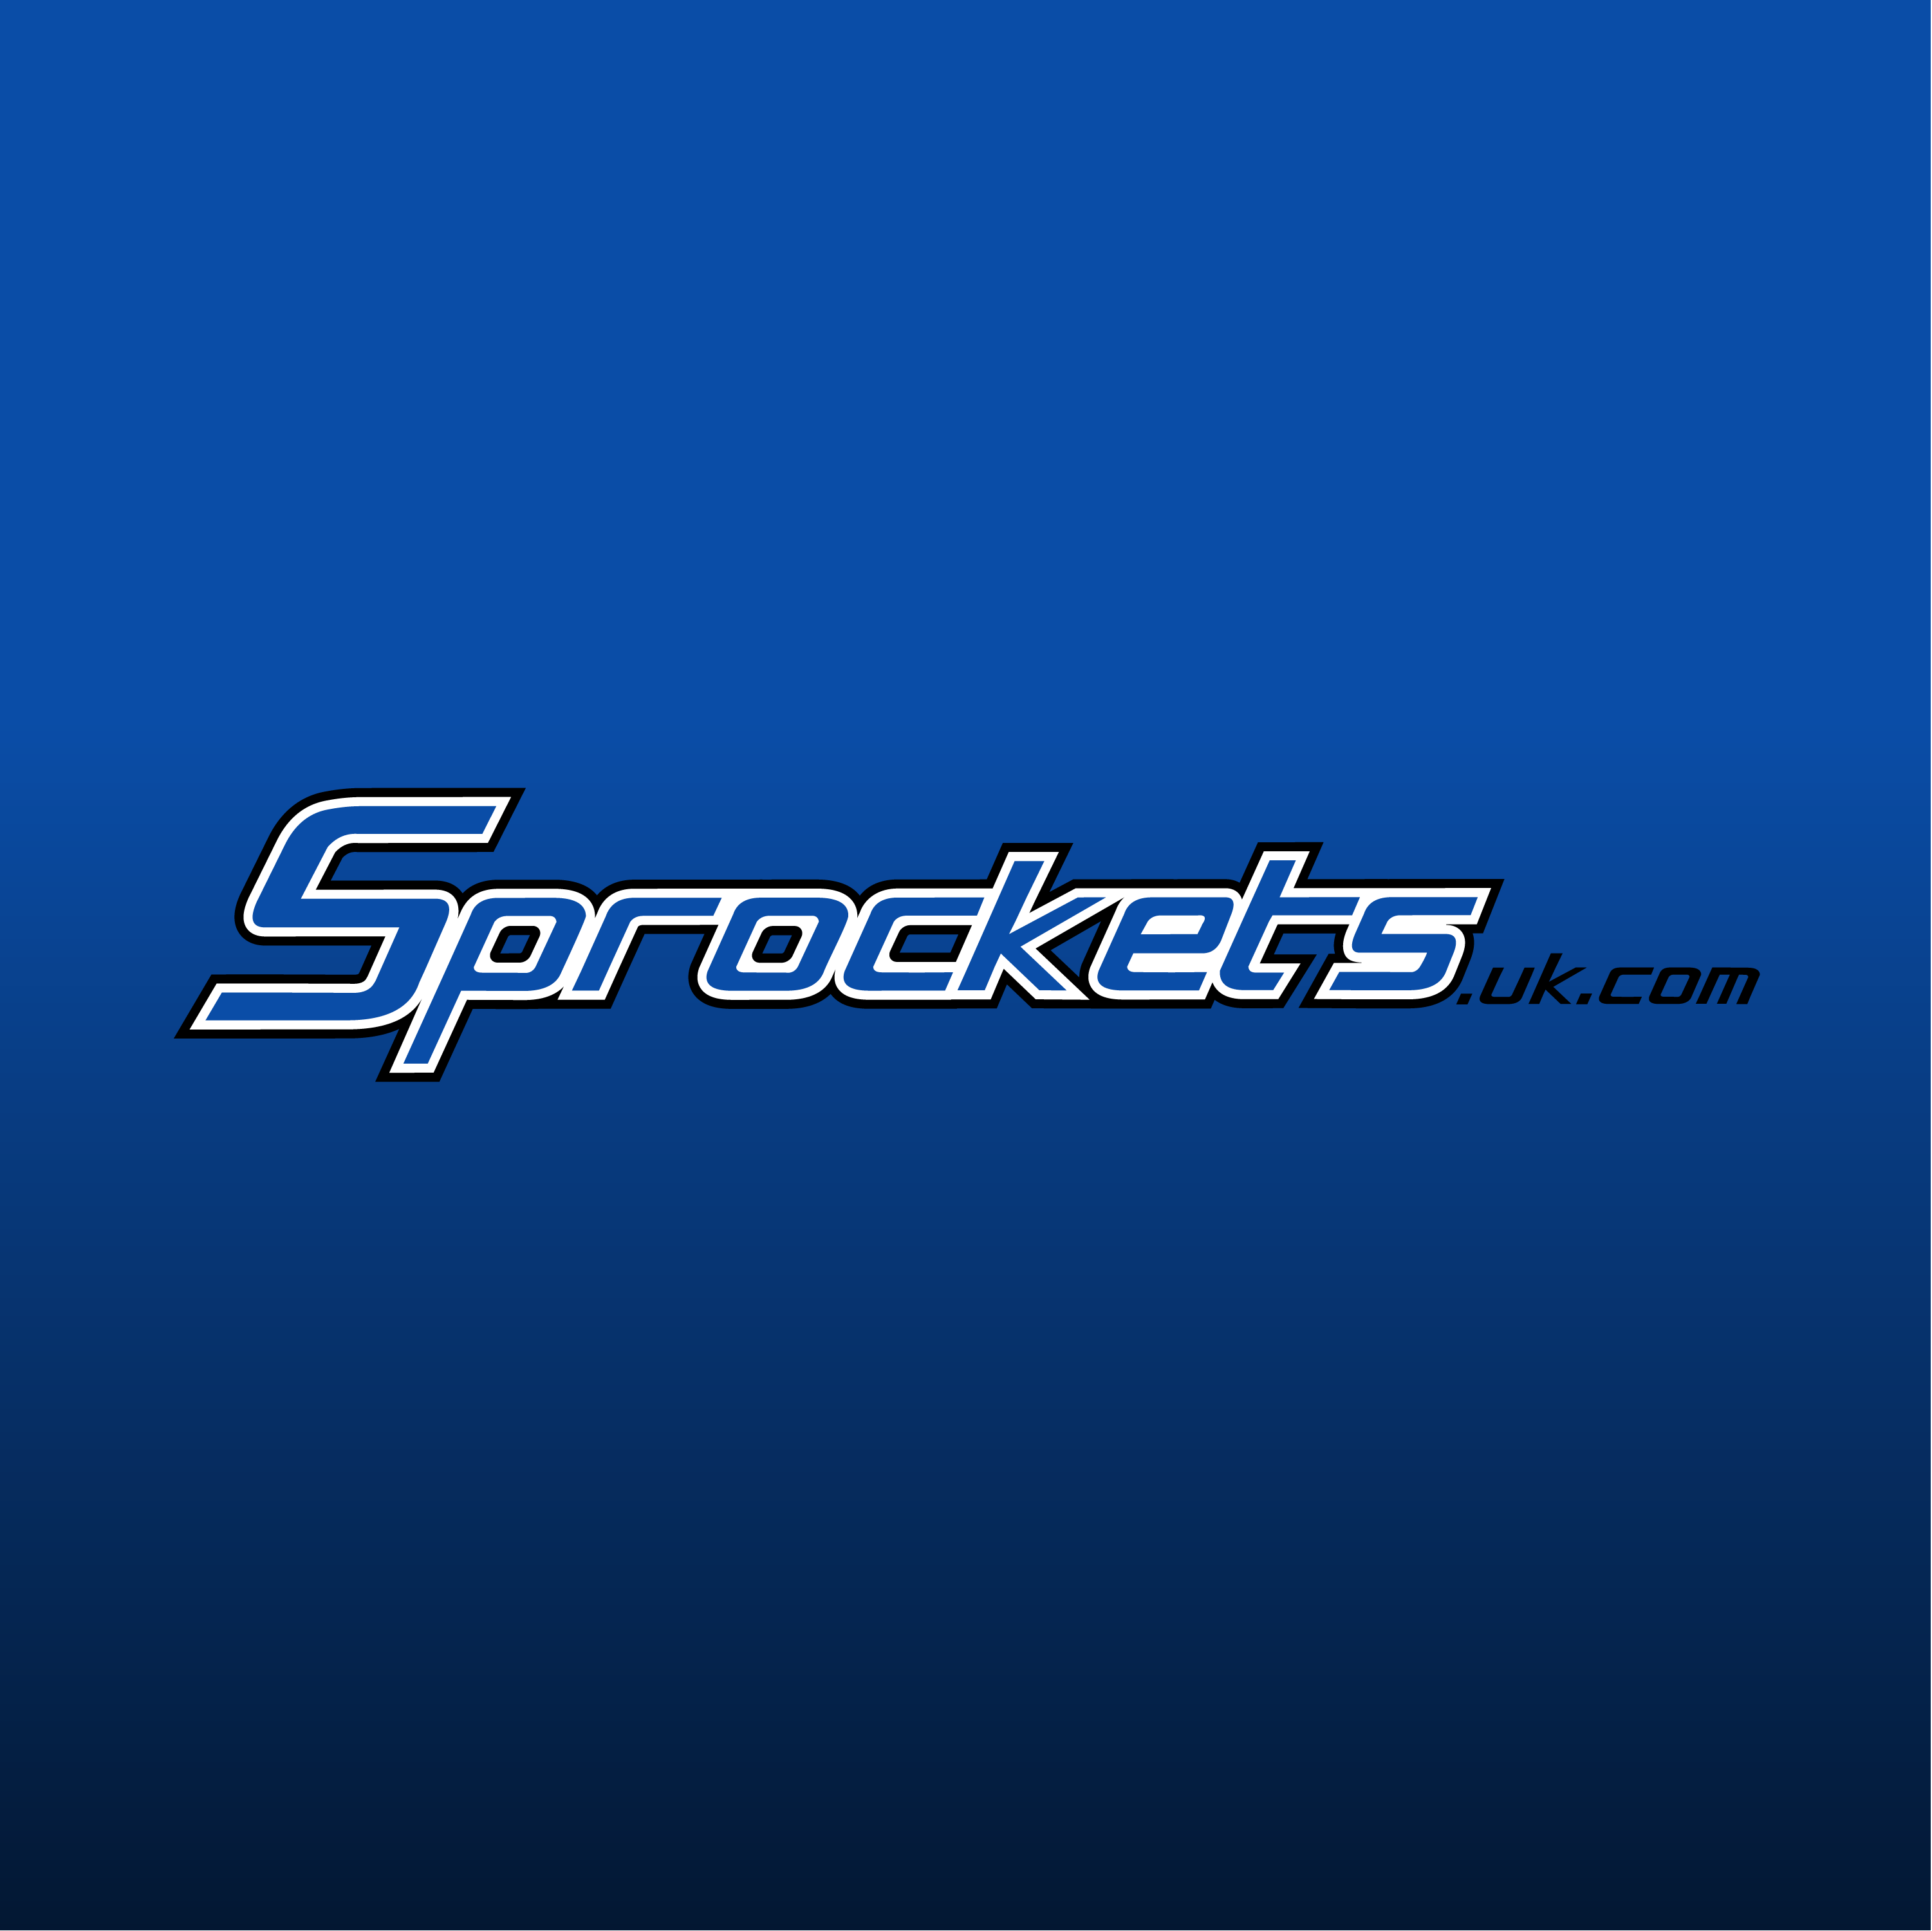 Club Image for SPROCKETS